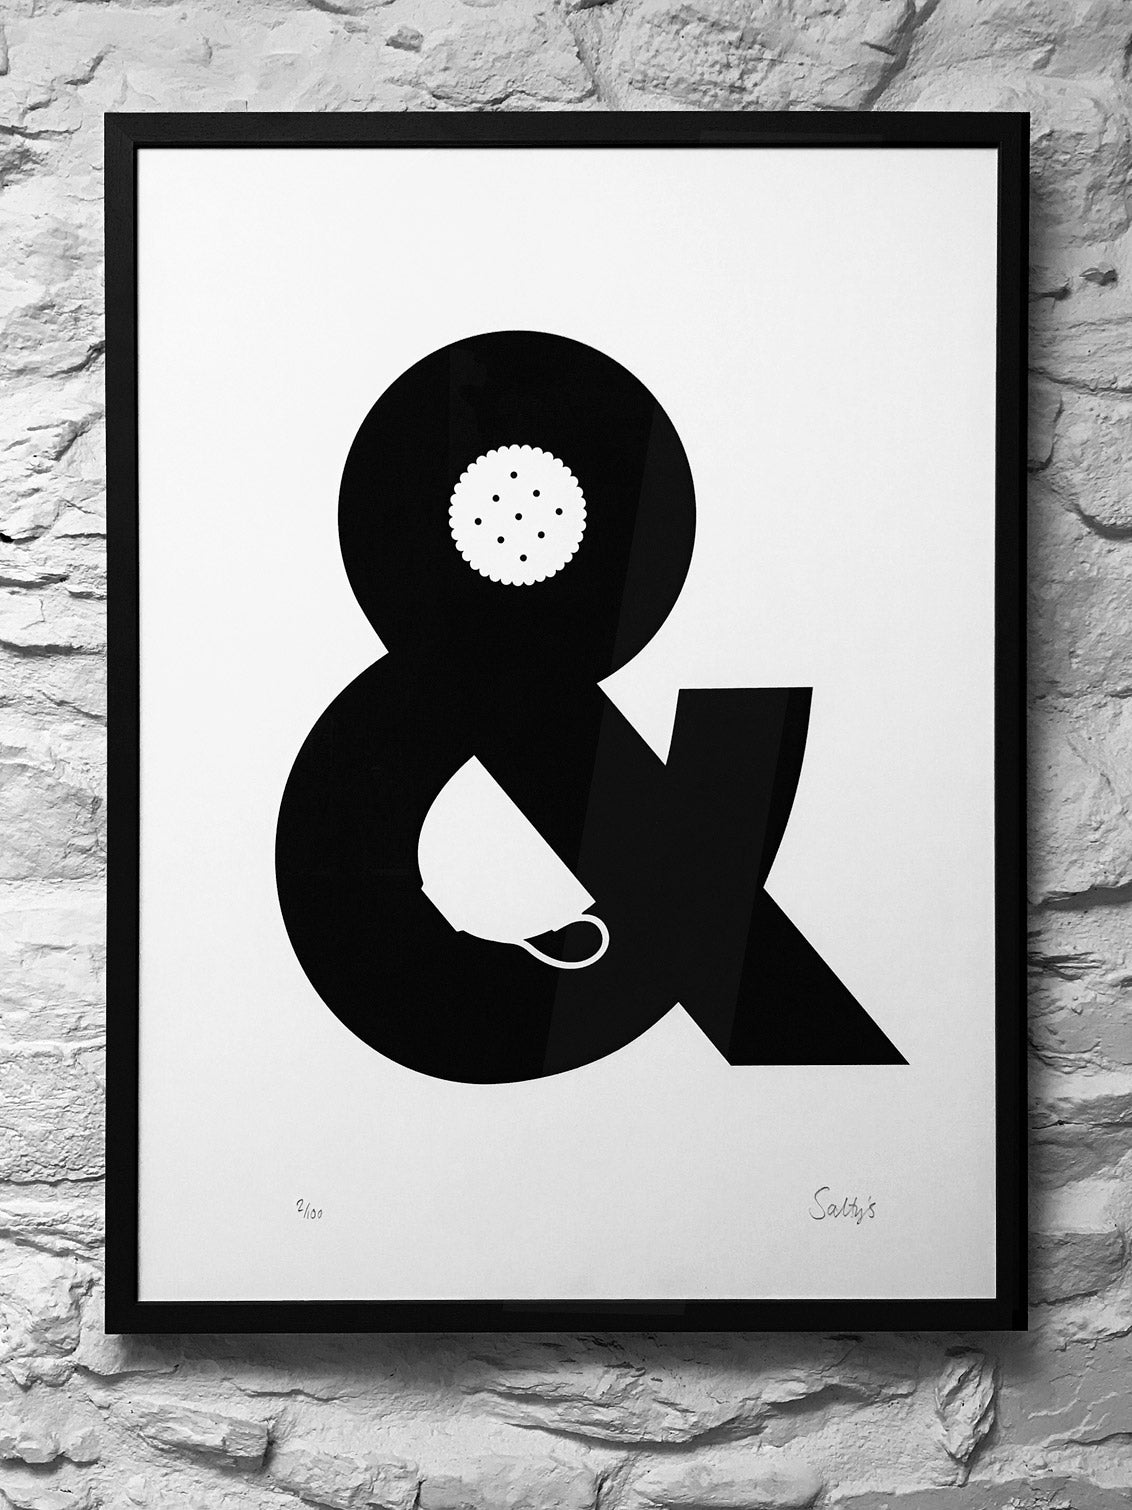 A framed monochrome print hangs on a rough whitewashed Devon wall. The picture is a screenprint of an ampersand with a china cup and a biscuit made out of the negative space. It reads visually as Tea and Biscuits 